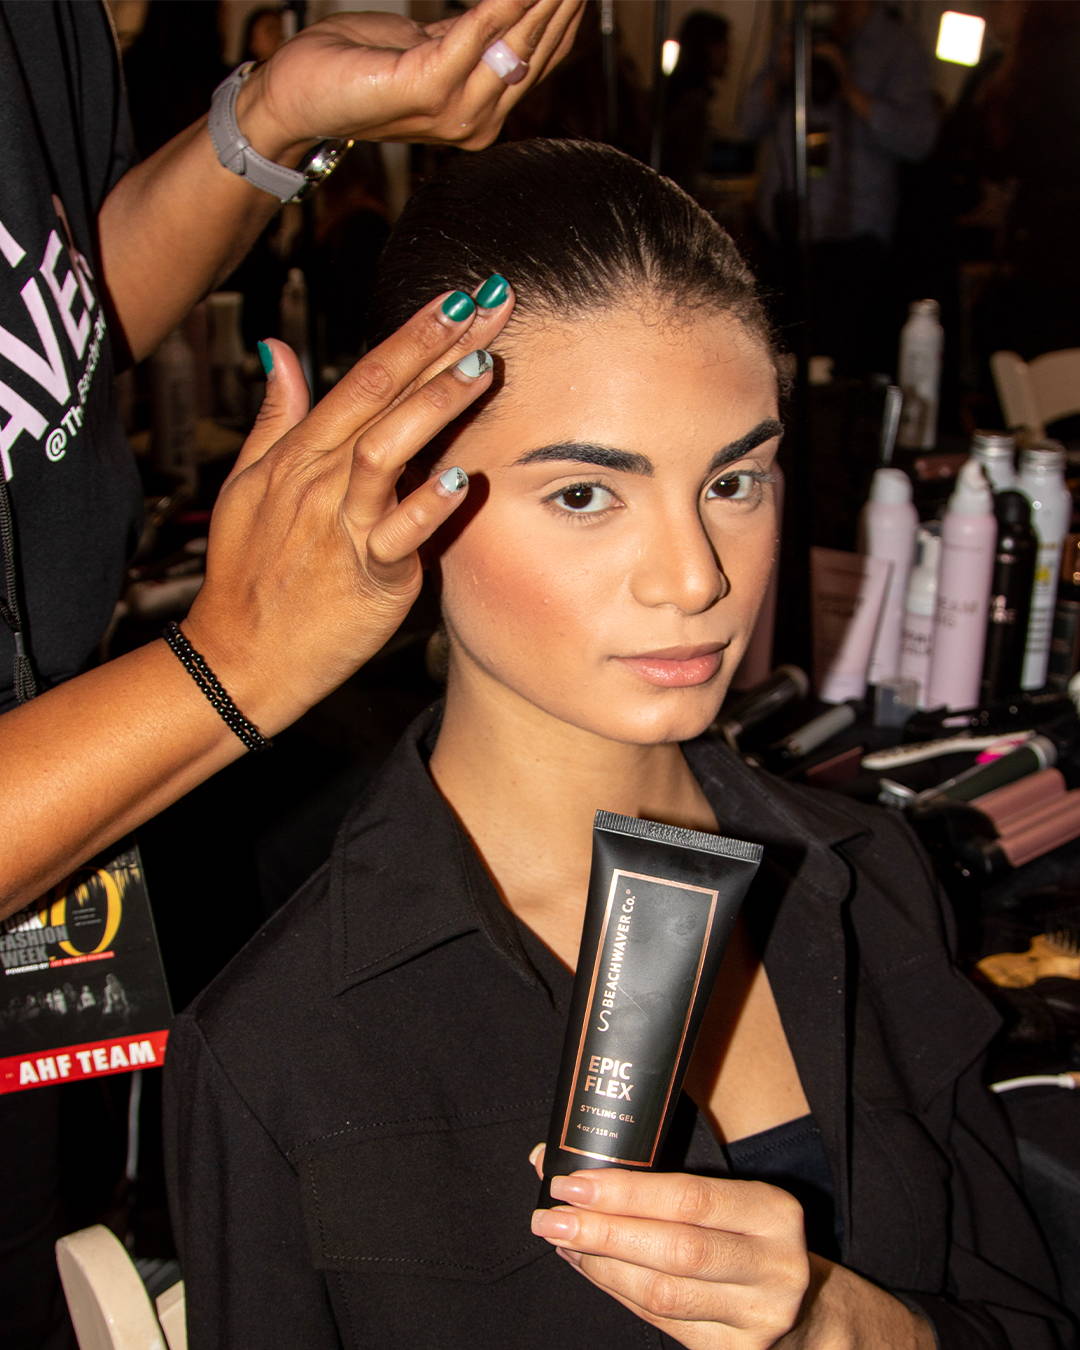 Image of a model at NYFW getting her hair slicked back with the Epic Flex Gel in a sleek look.